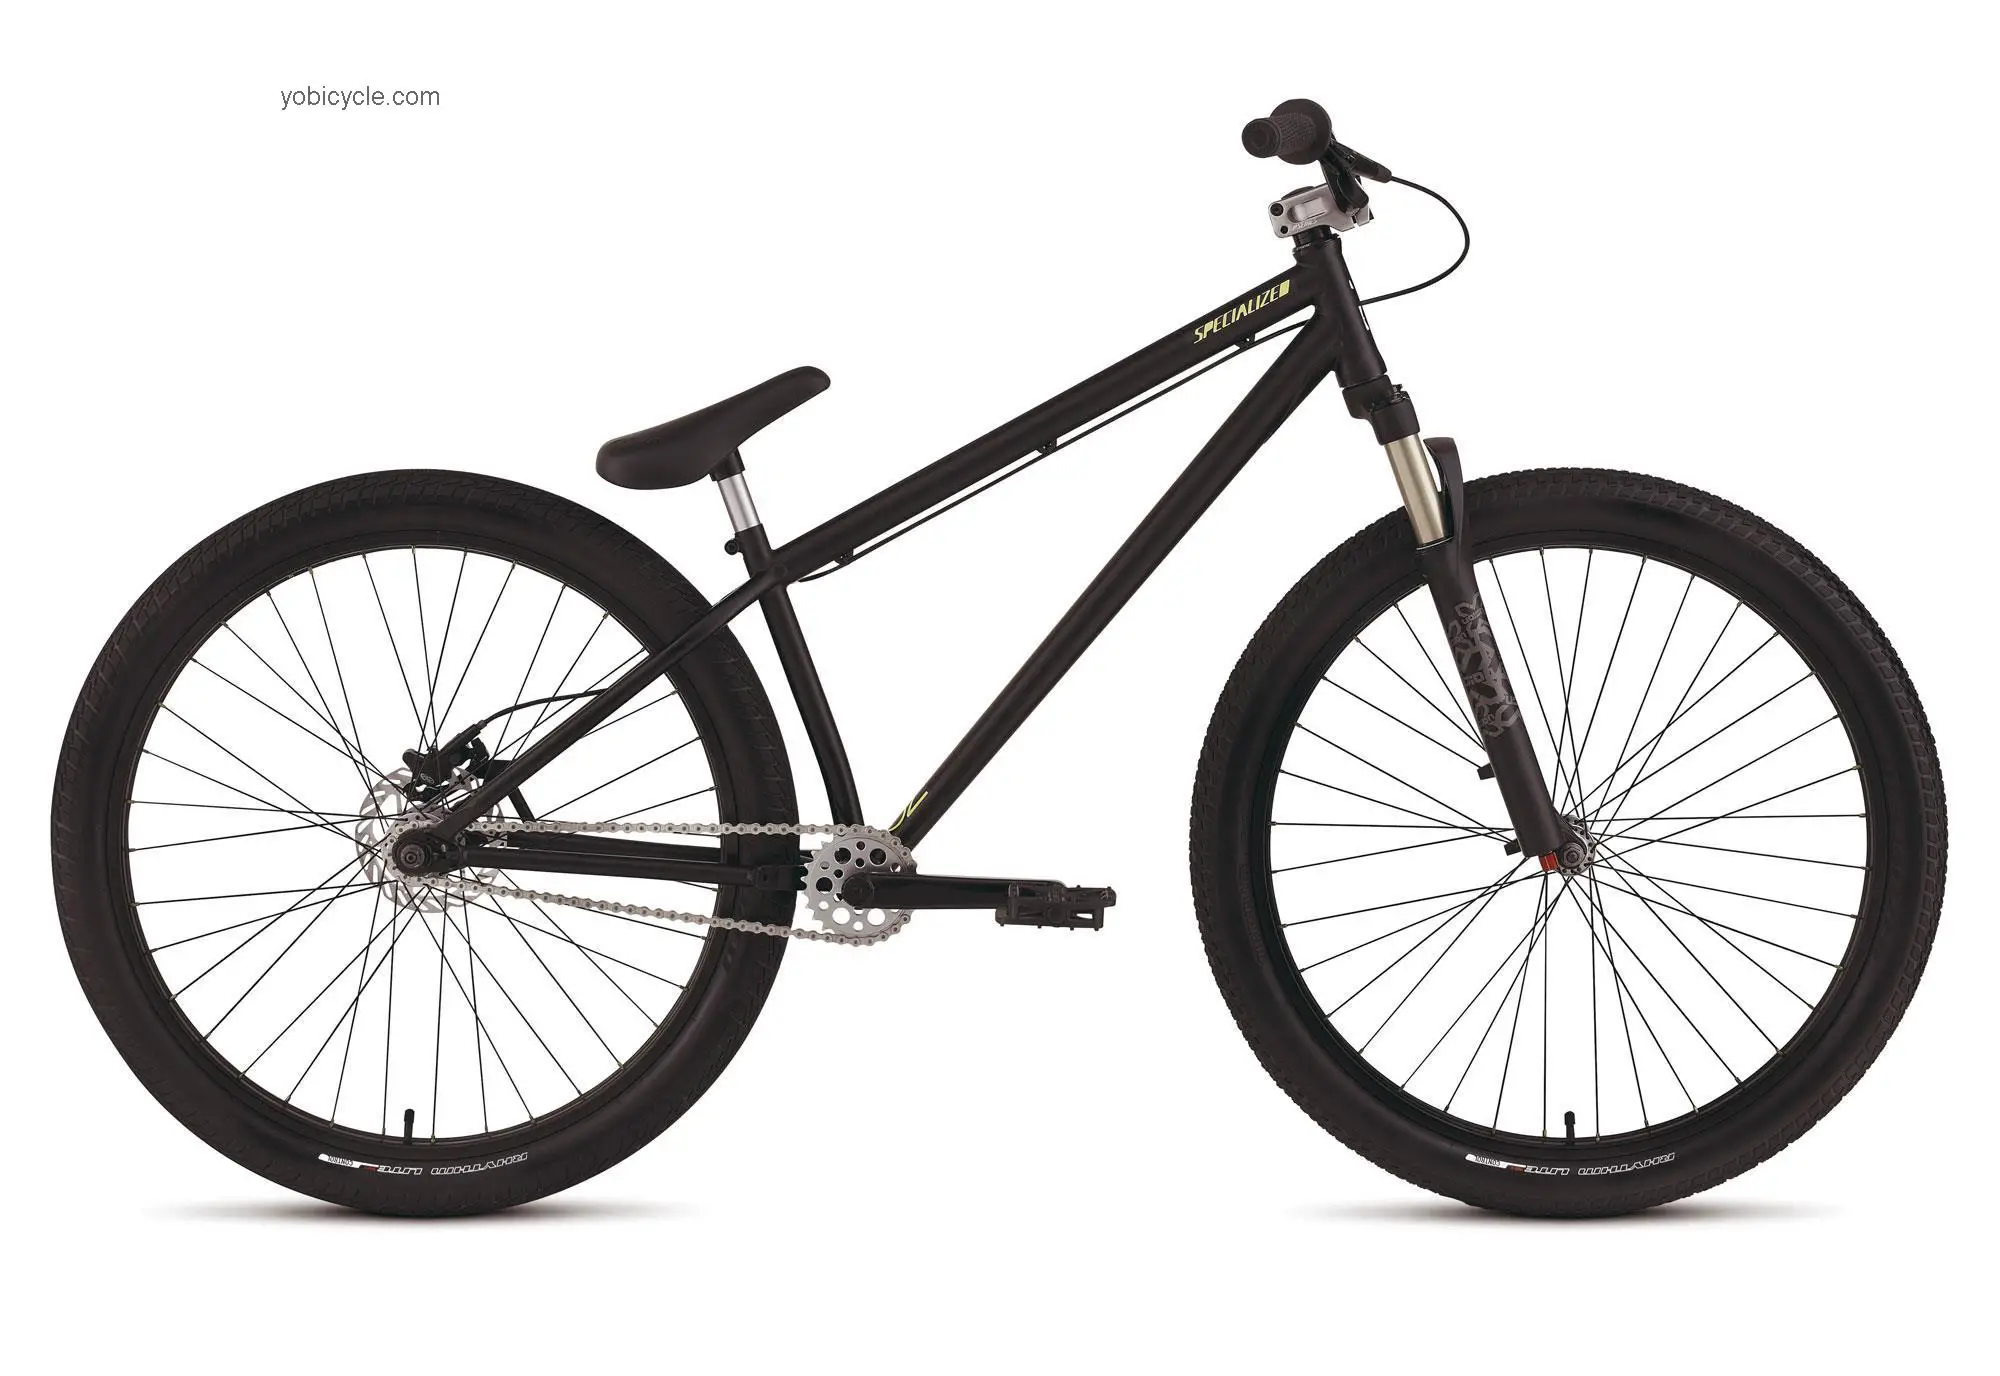 Specialized P2 competitors and comparison tool online specs and performance